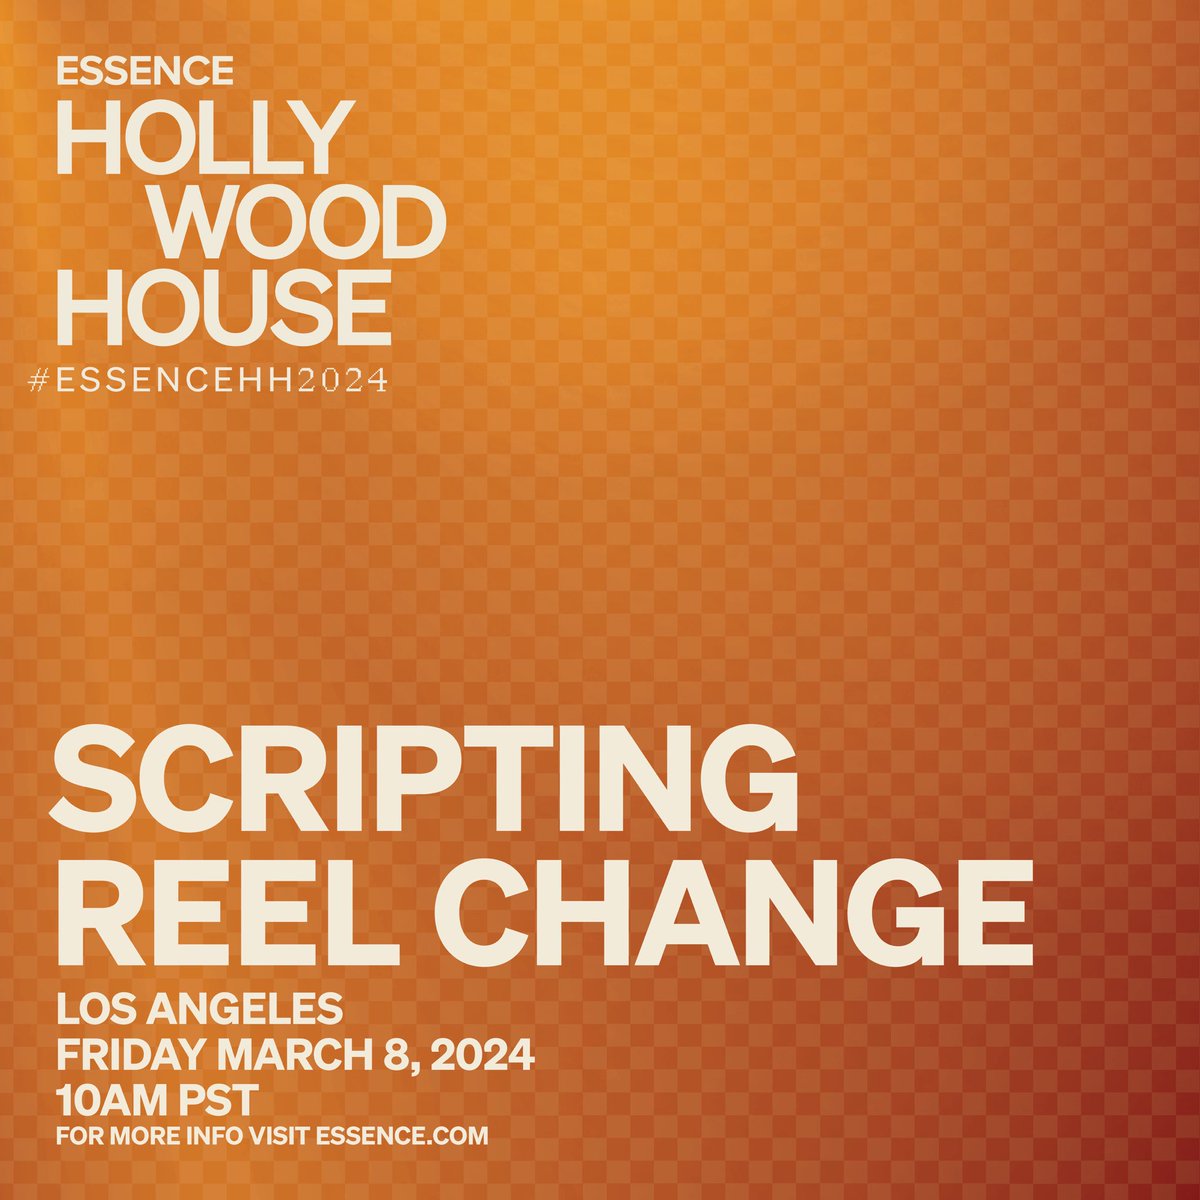 Calling all aspiring film creatives! Hollywood House is your hub for inspiration and empowerment. Join us Friday, March 8th, for thought-provoking conversations and activations as we begin “Scripting Reel Change” together. Los Angeles based attendees can register at:…